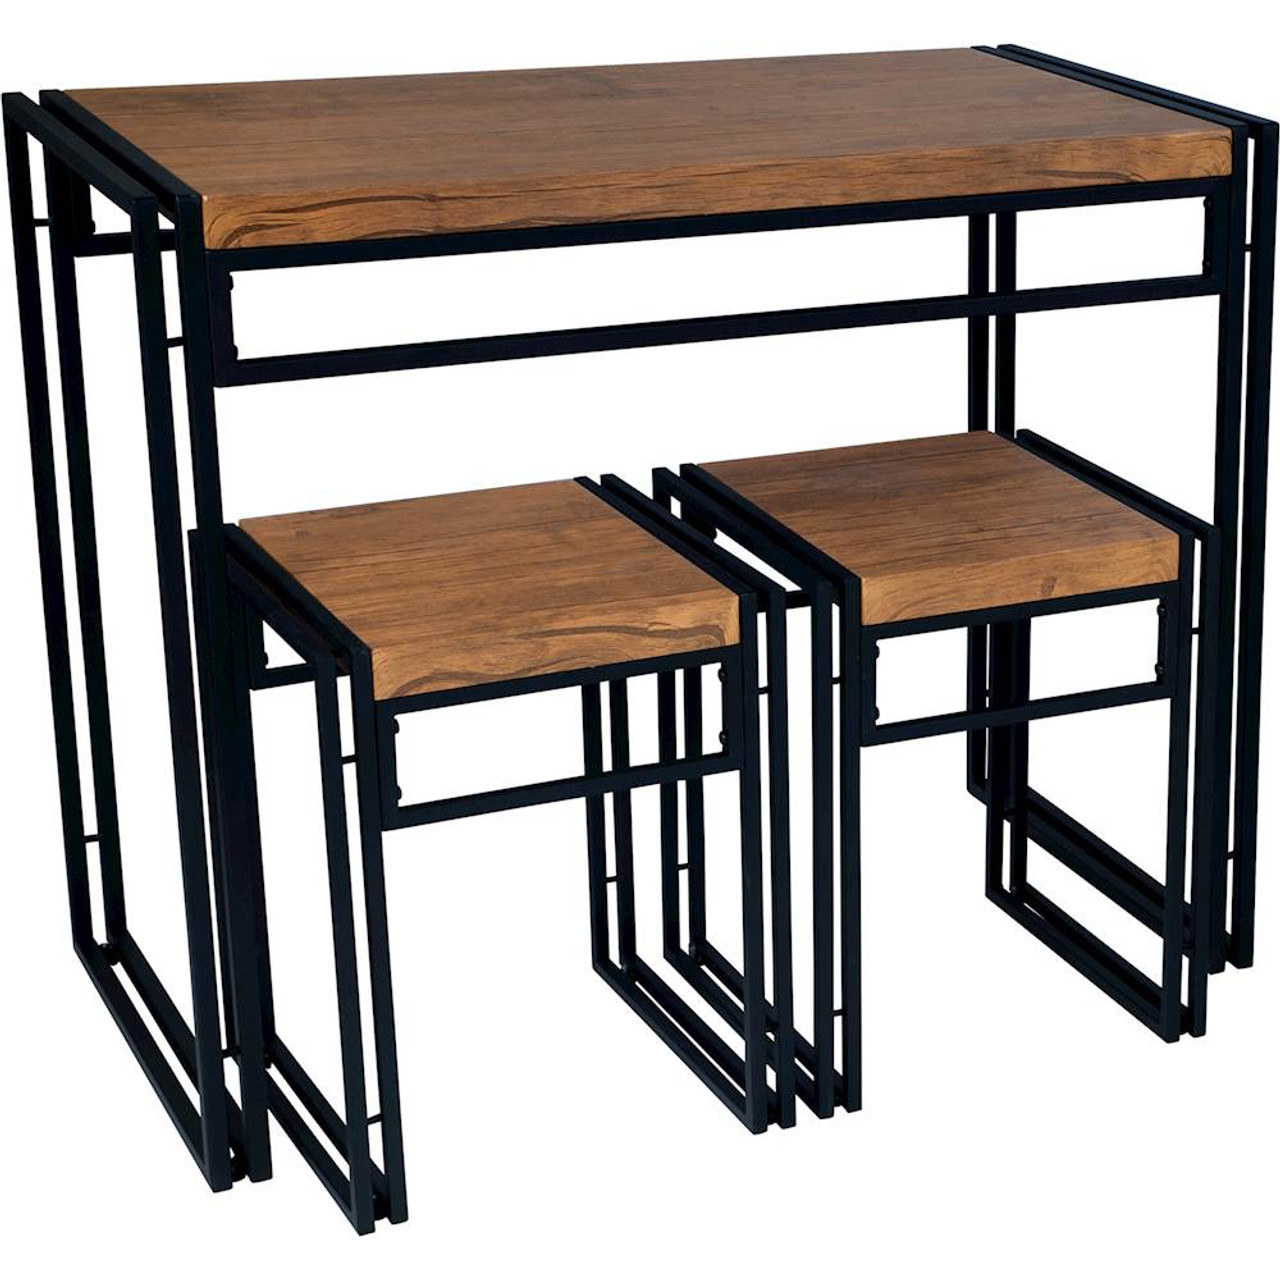 ürb SPACE - Urban Small Dining Table Set - Black With Brown